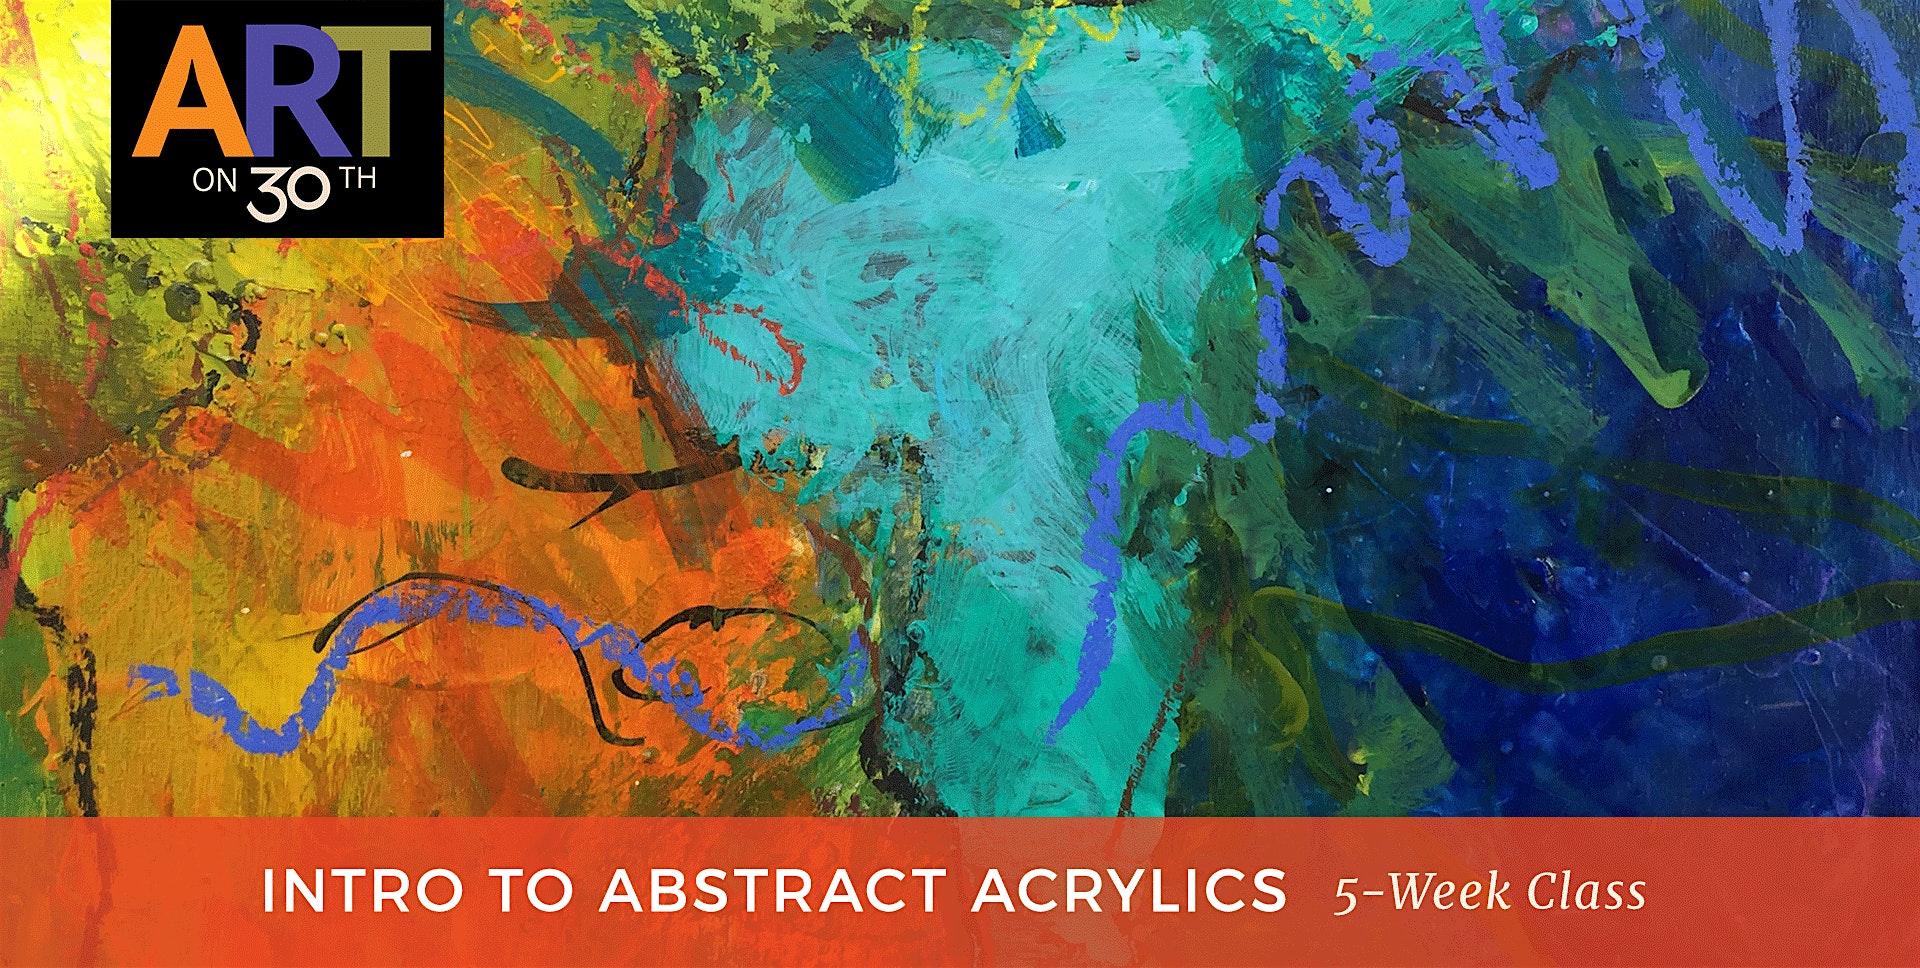 TUE AM - Intro to Abstract Acrylic Painting with Maureen Kerr